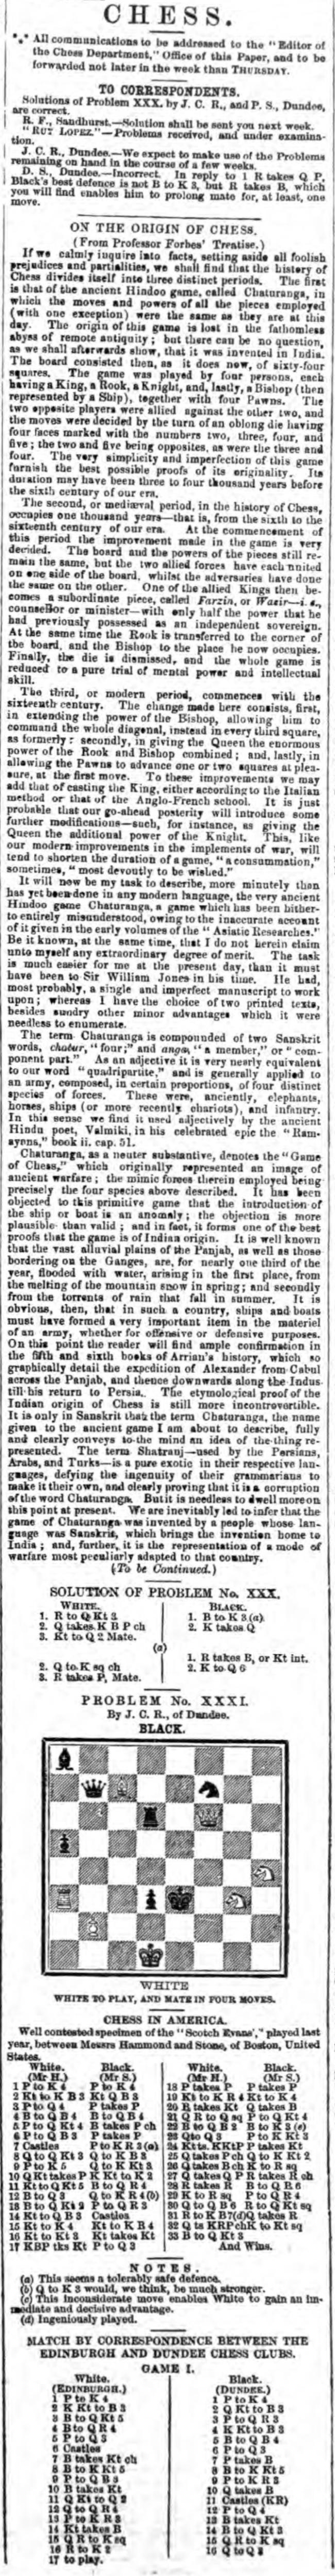 1863.02.23-01 Dundee Courier and Argus.jpg